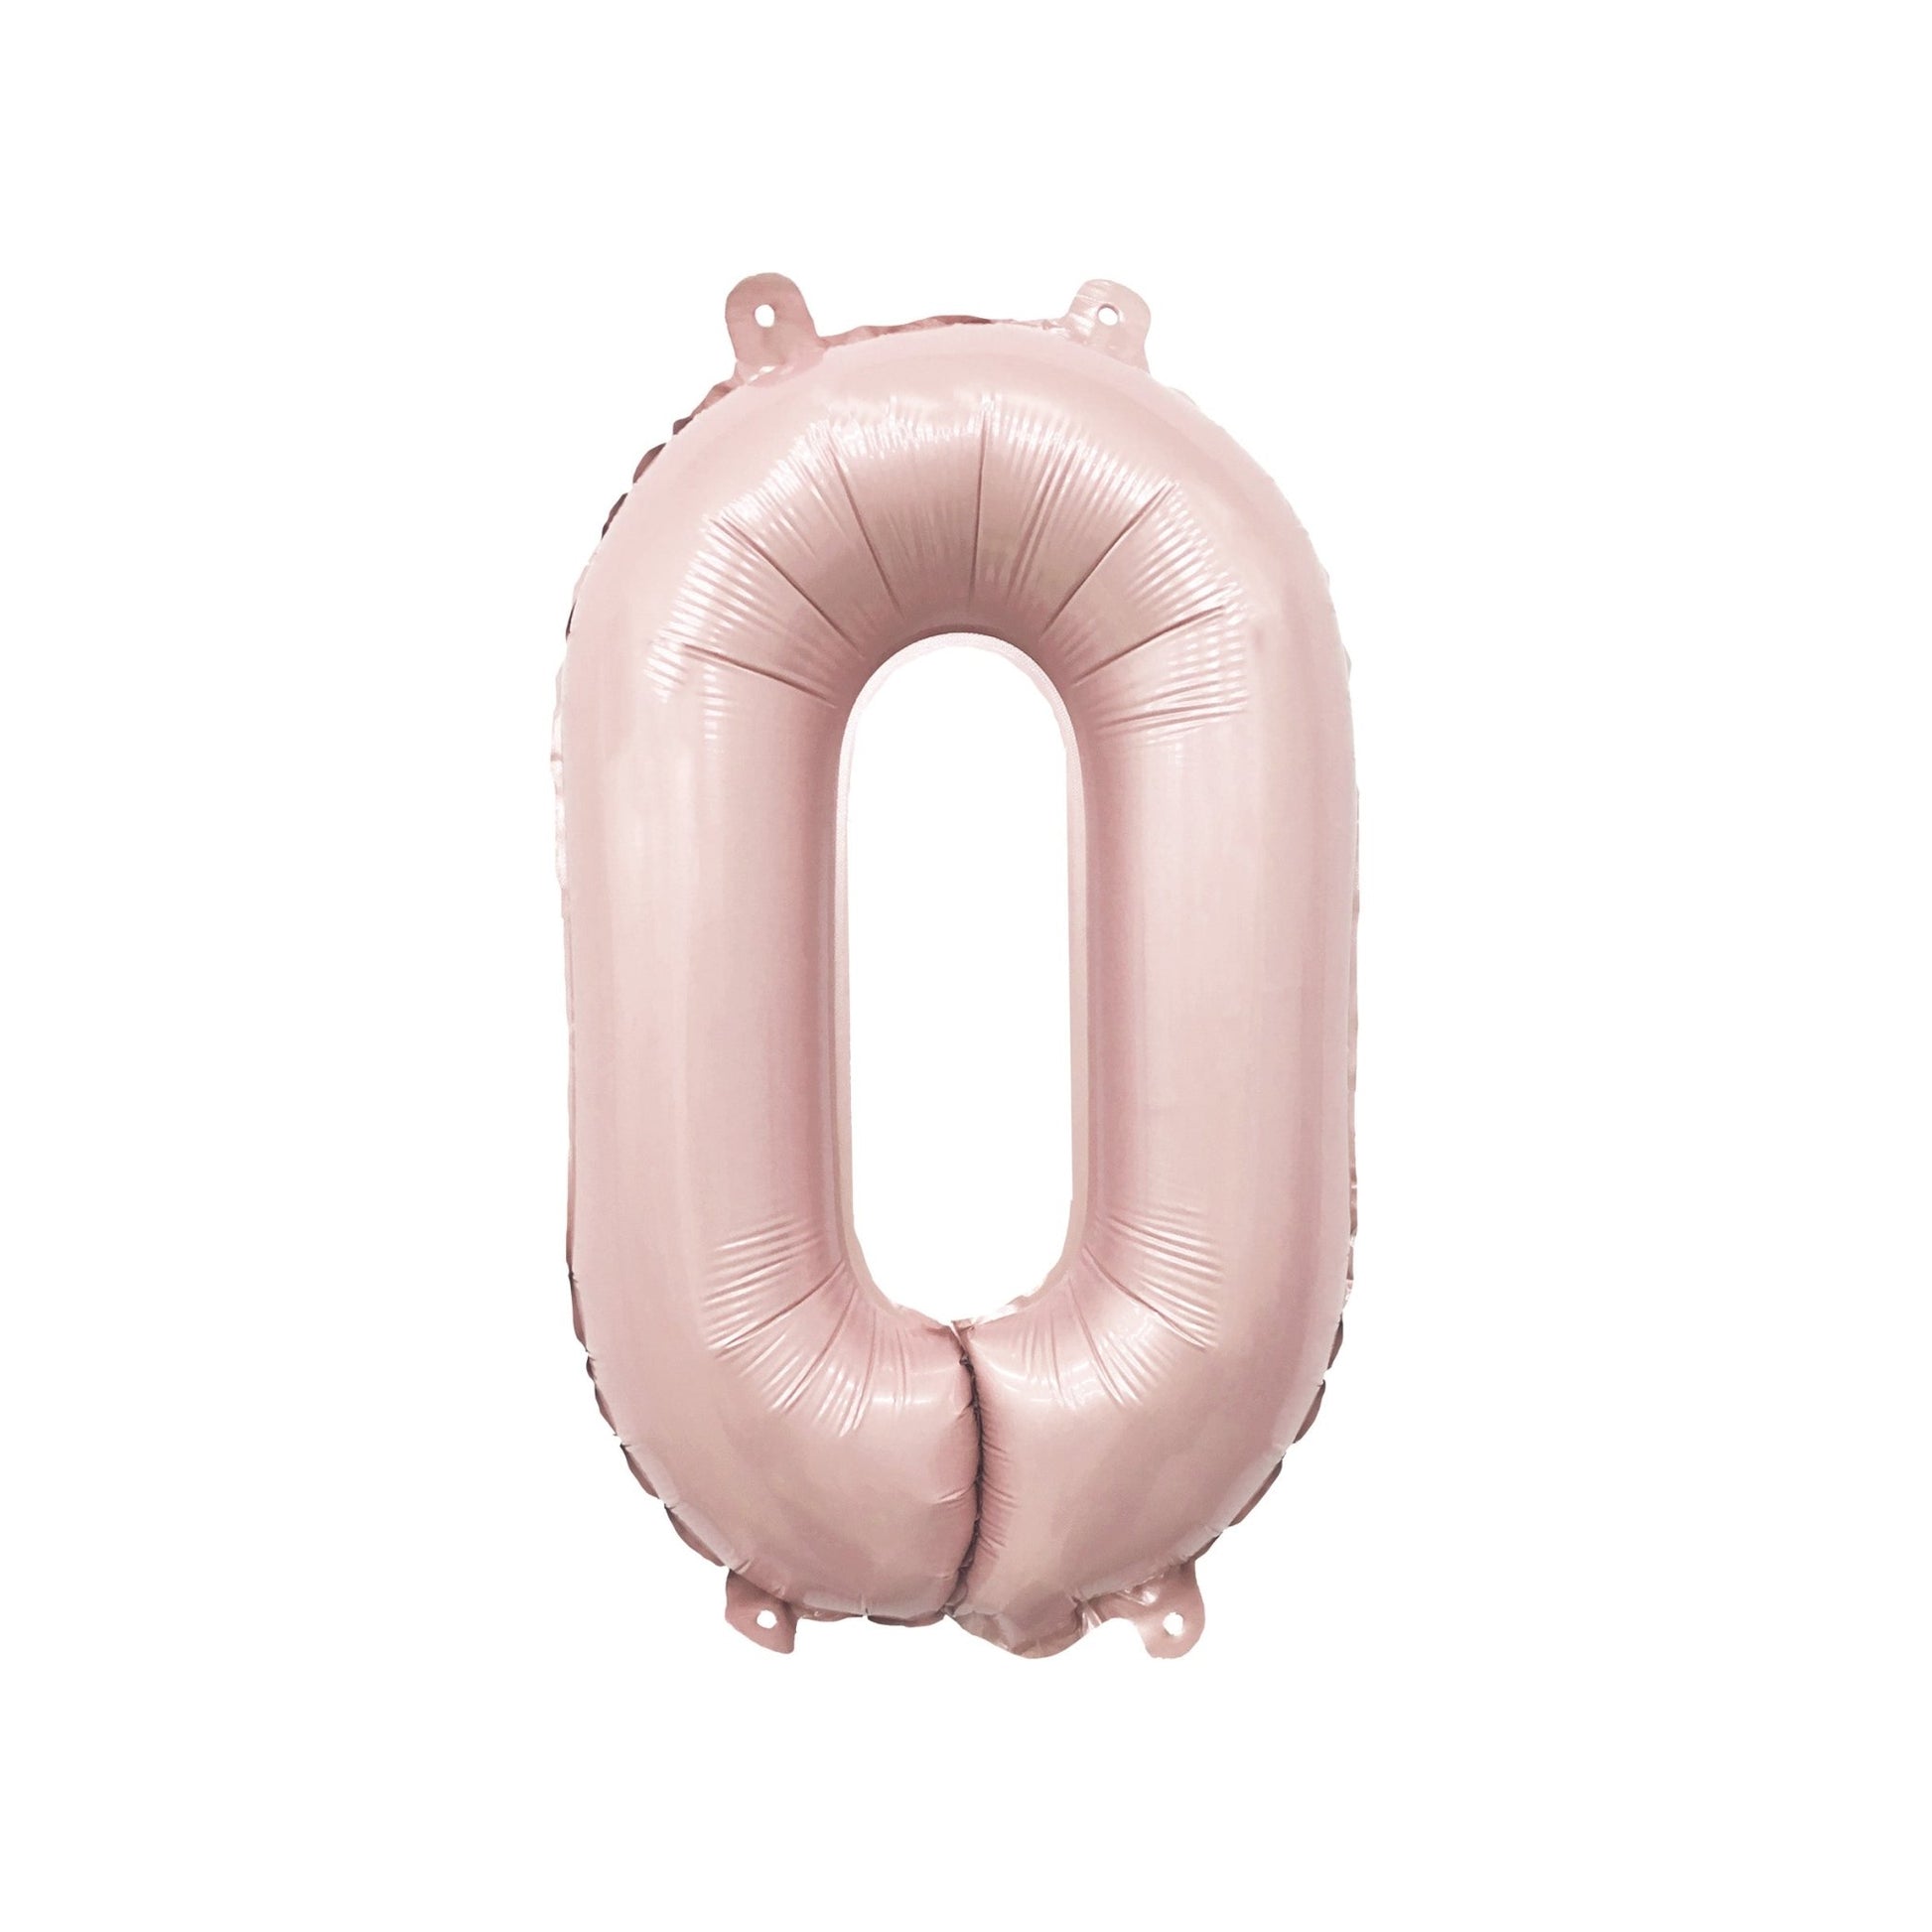 Barely Blush Mylar Number Balloons In.) from Ellie's Party Supply